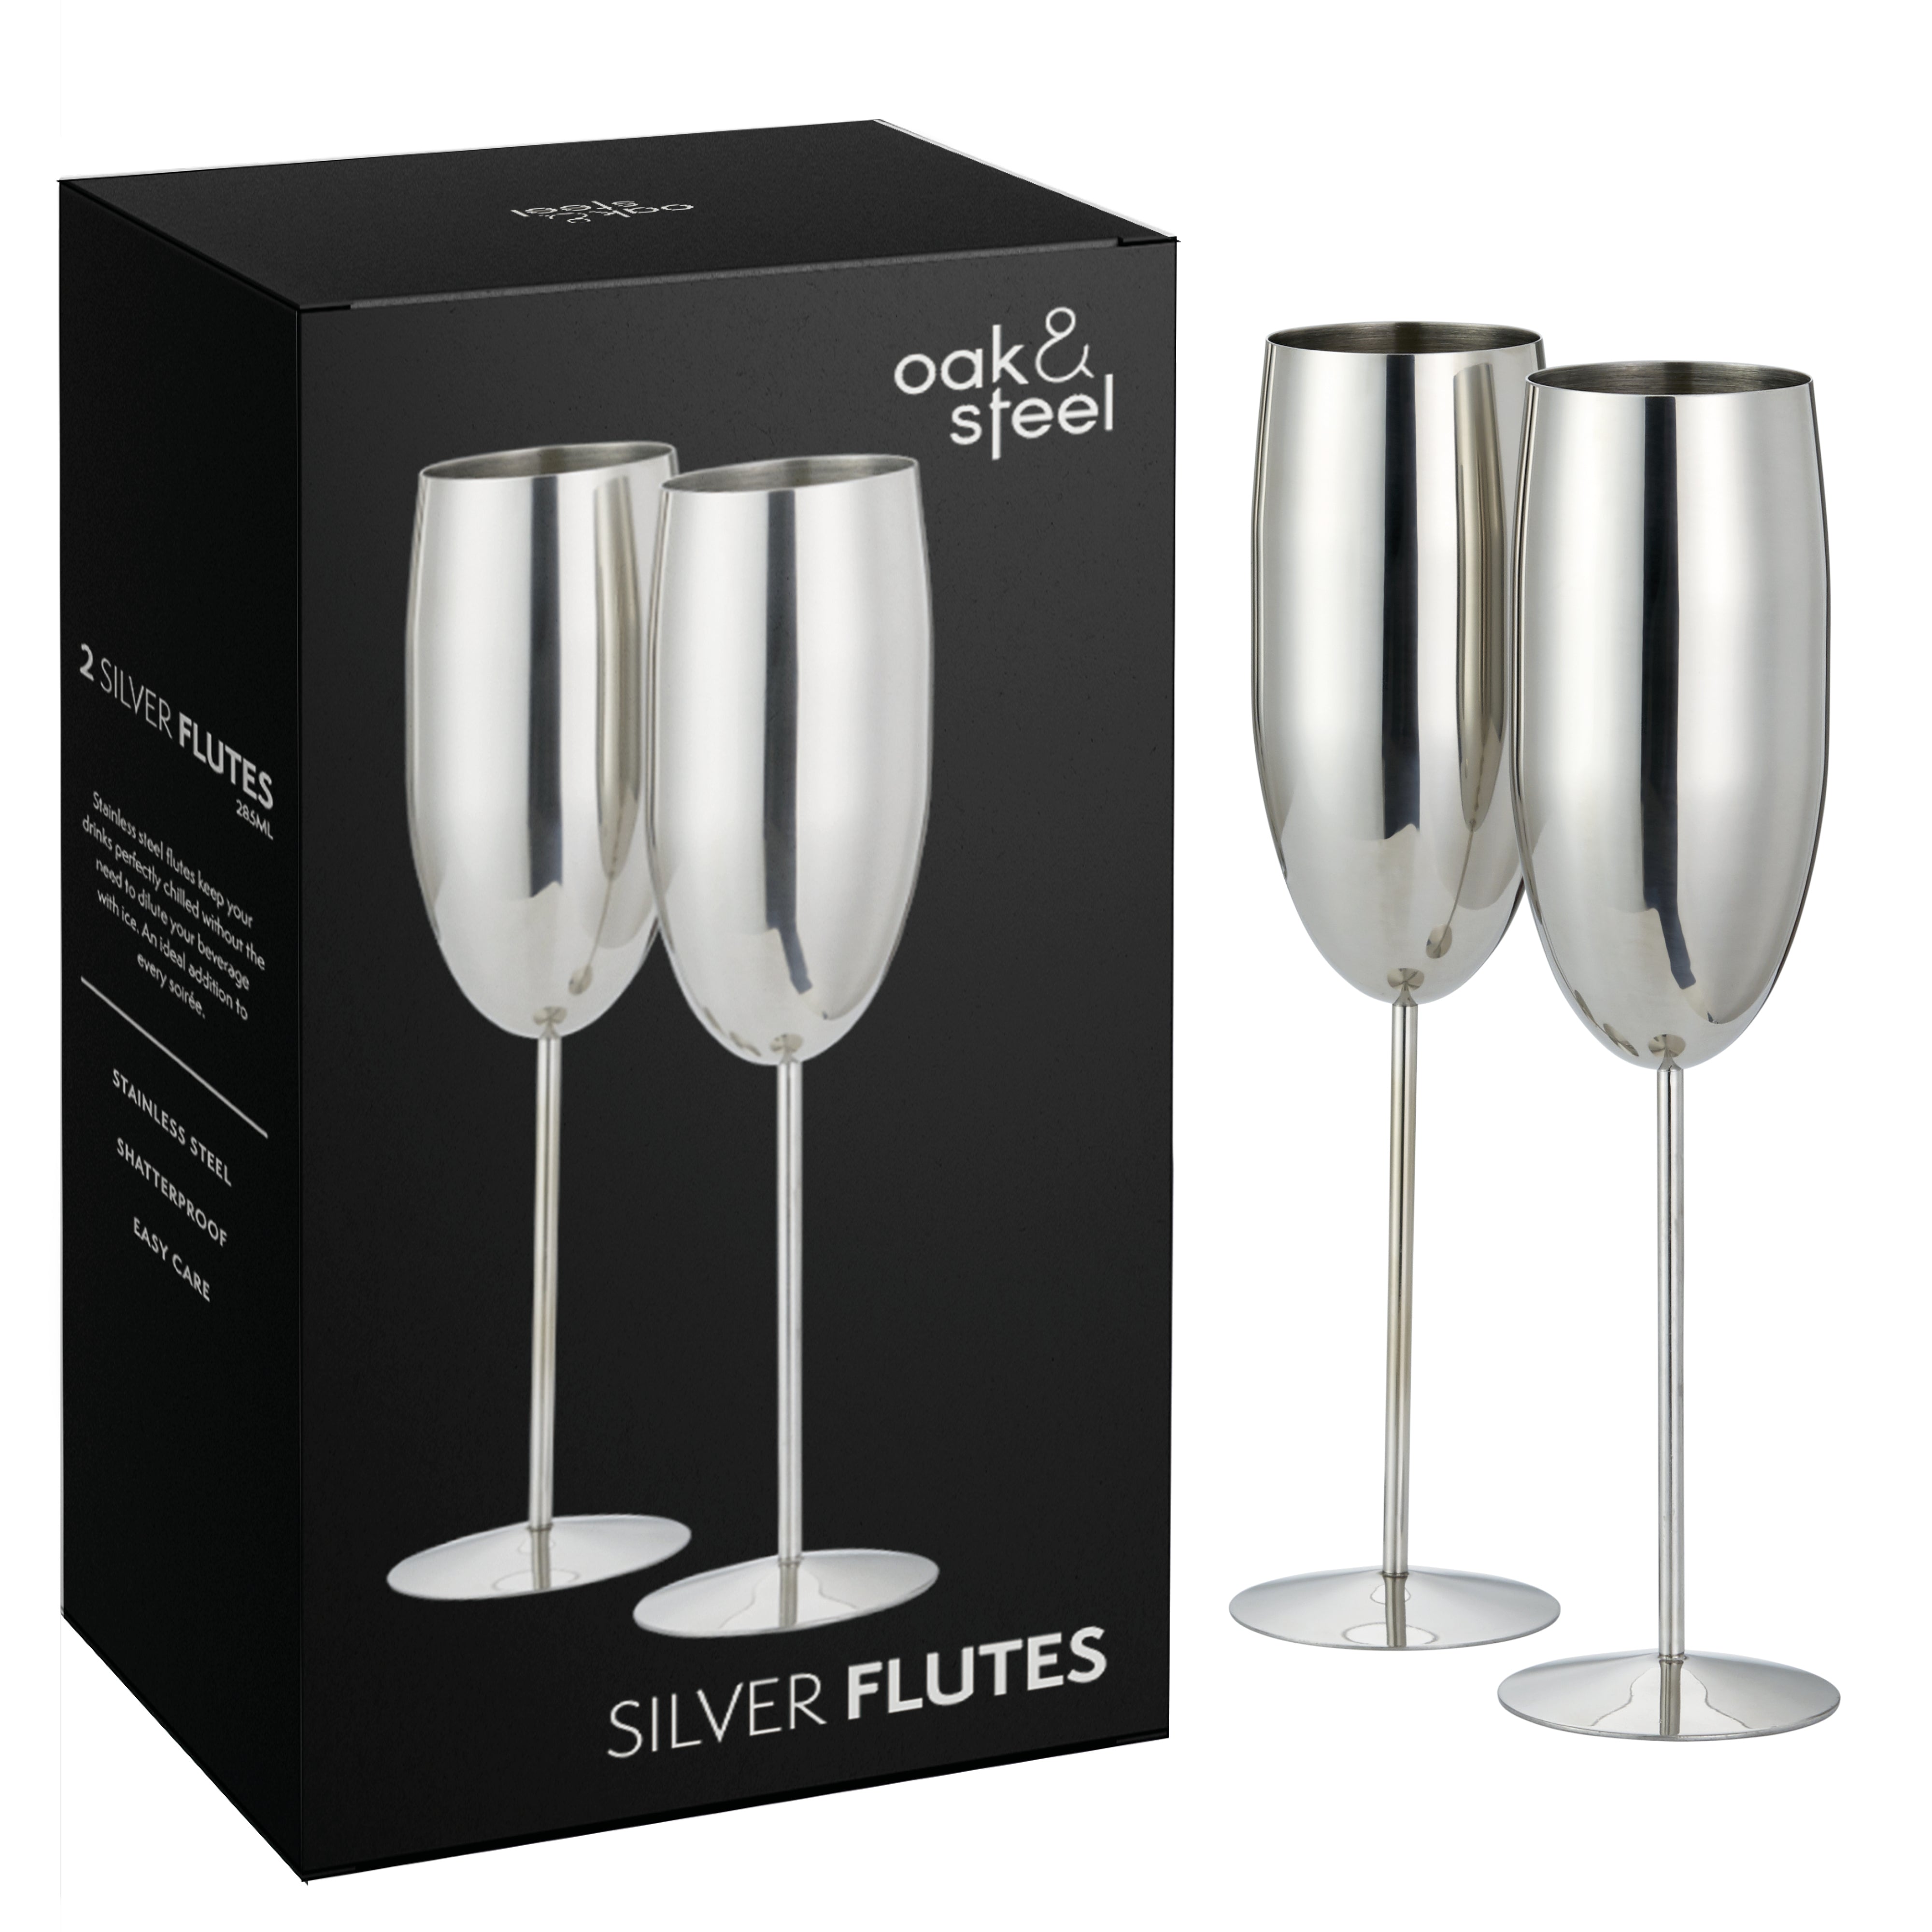 2 Silver Stainless Steel Champagne Flutes